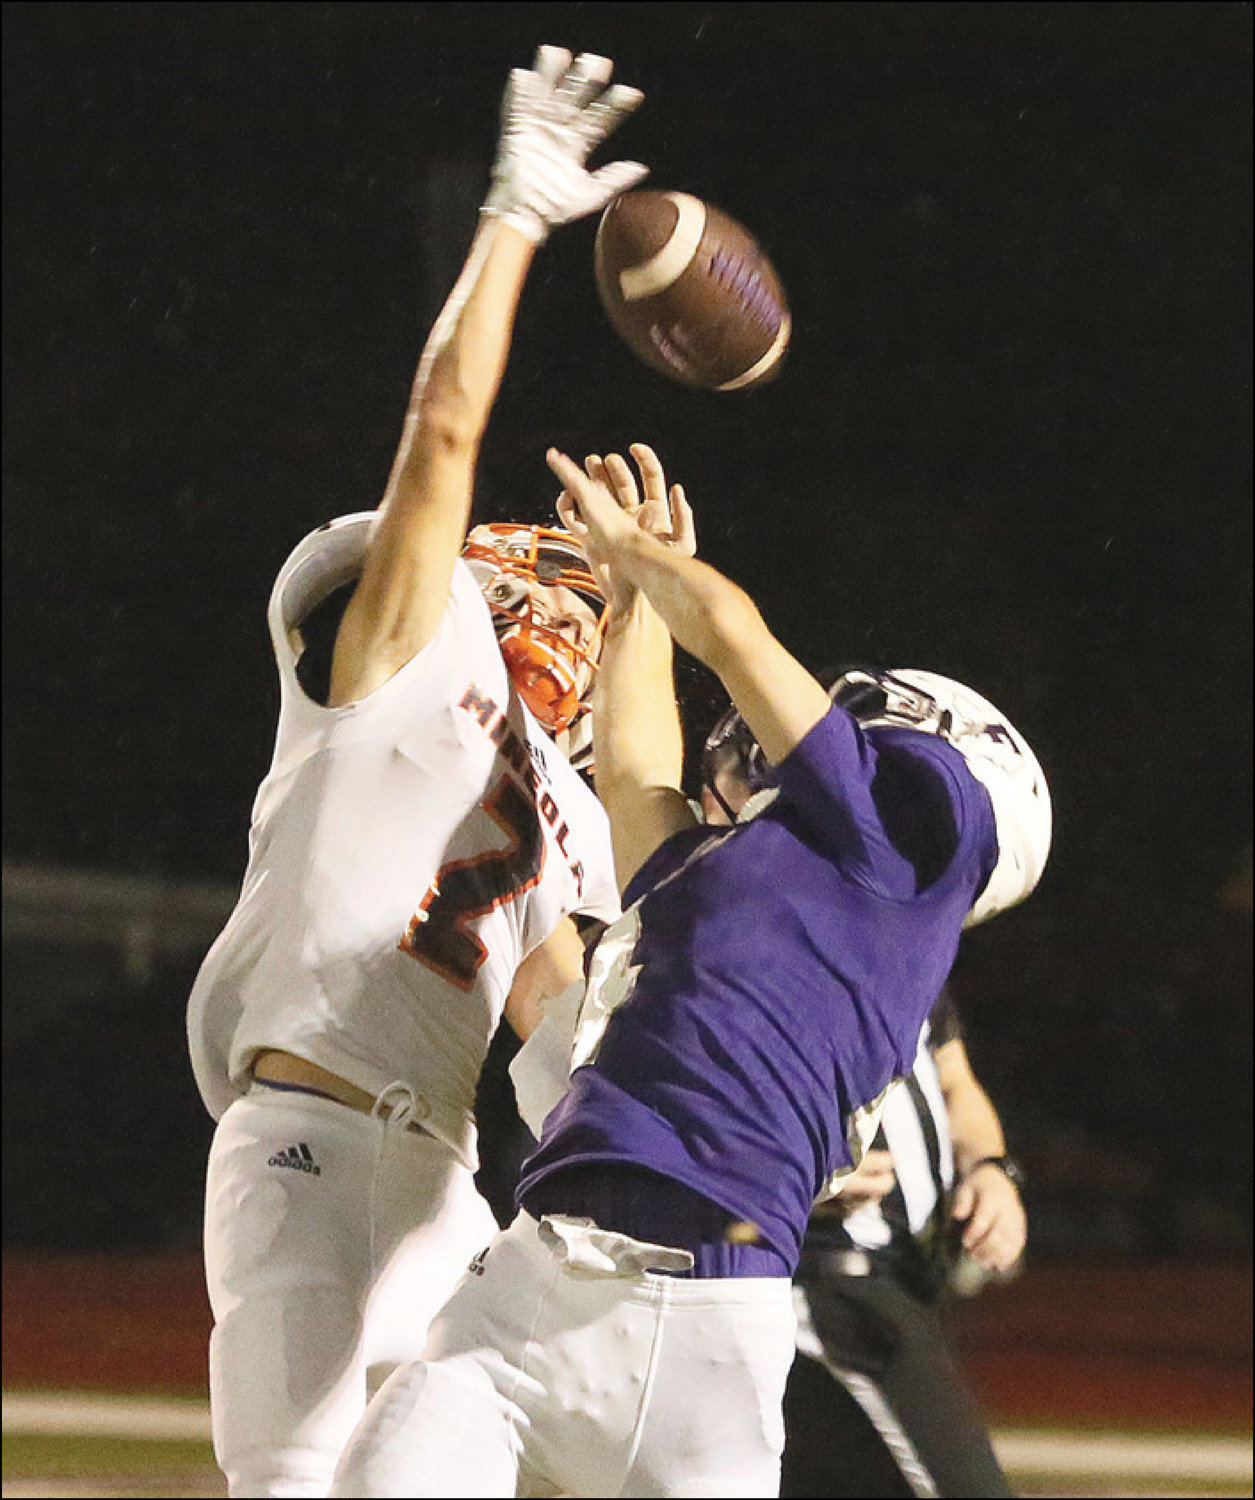 Mineola’s Dalton Rogers makes a great defensive stop to break up a pass play in the ‘Jackets win at Farmersville.